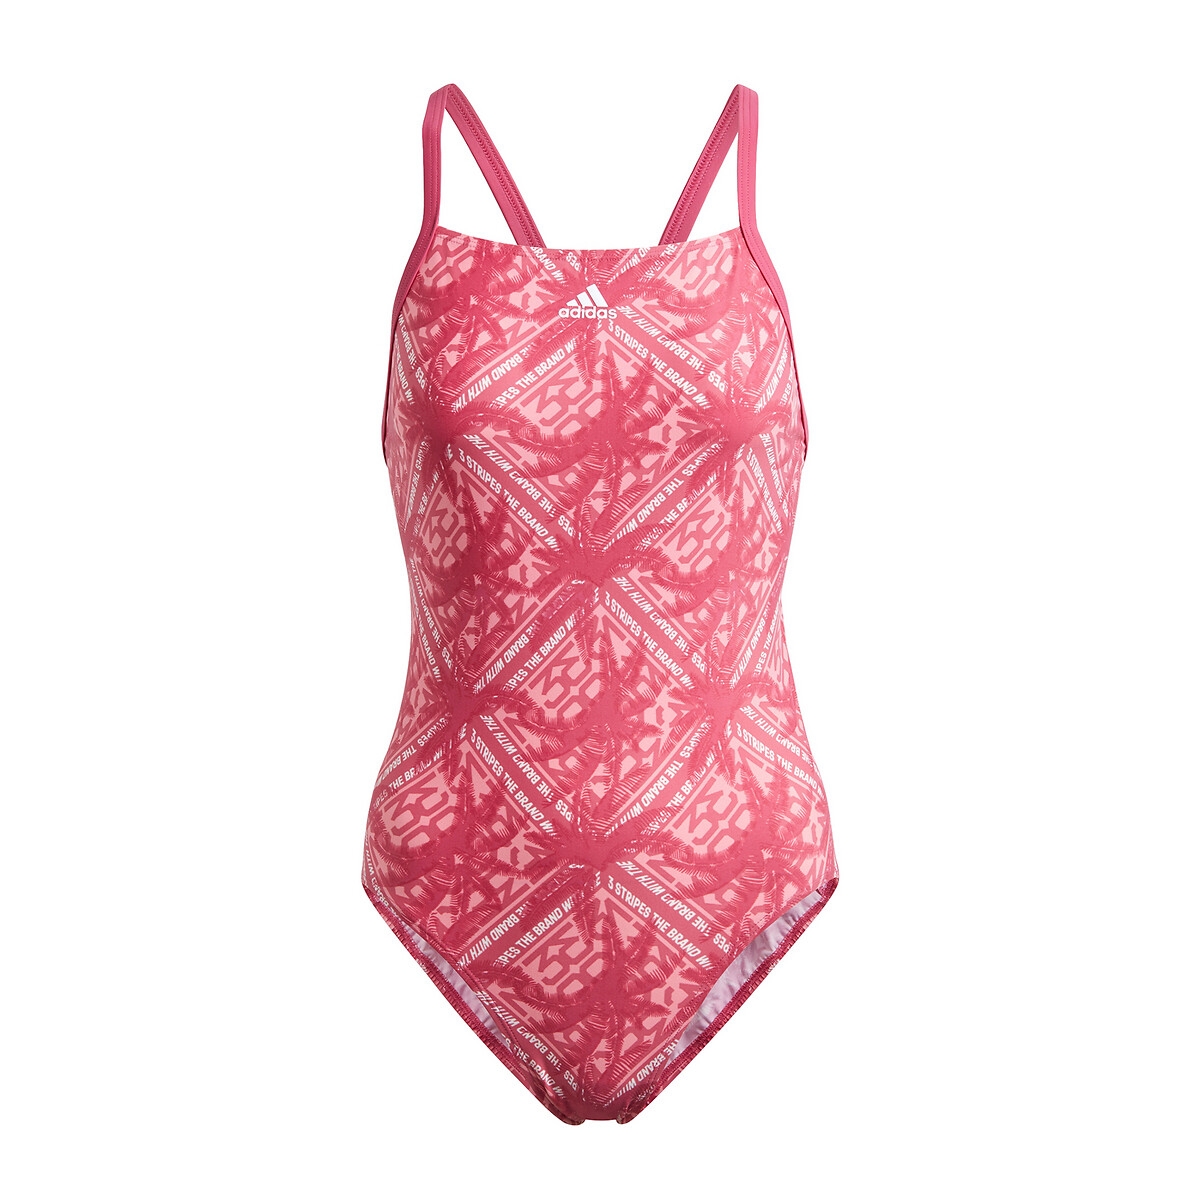 Fitness Eco Pool Swimsuit in Recycled Fabric